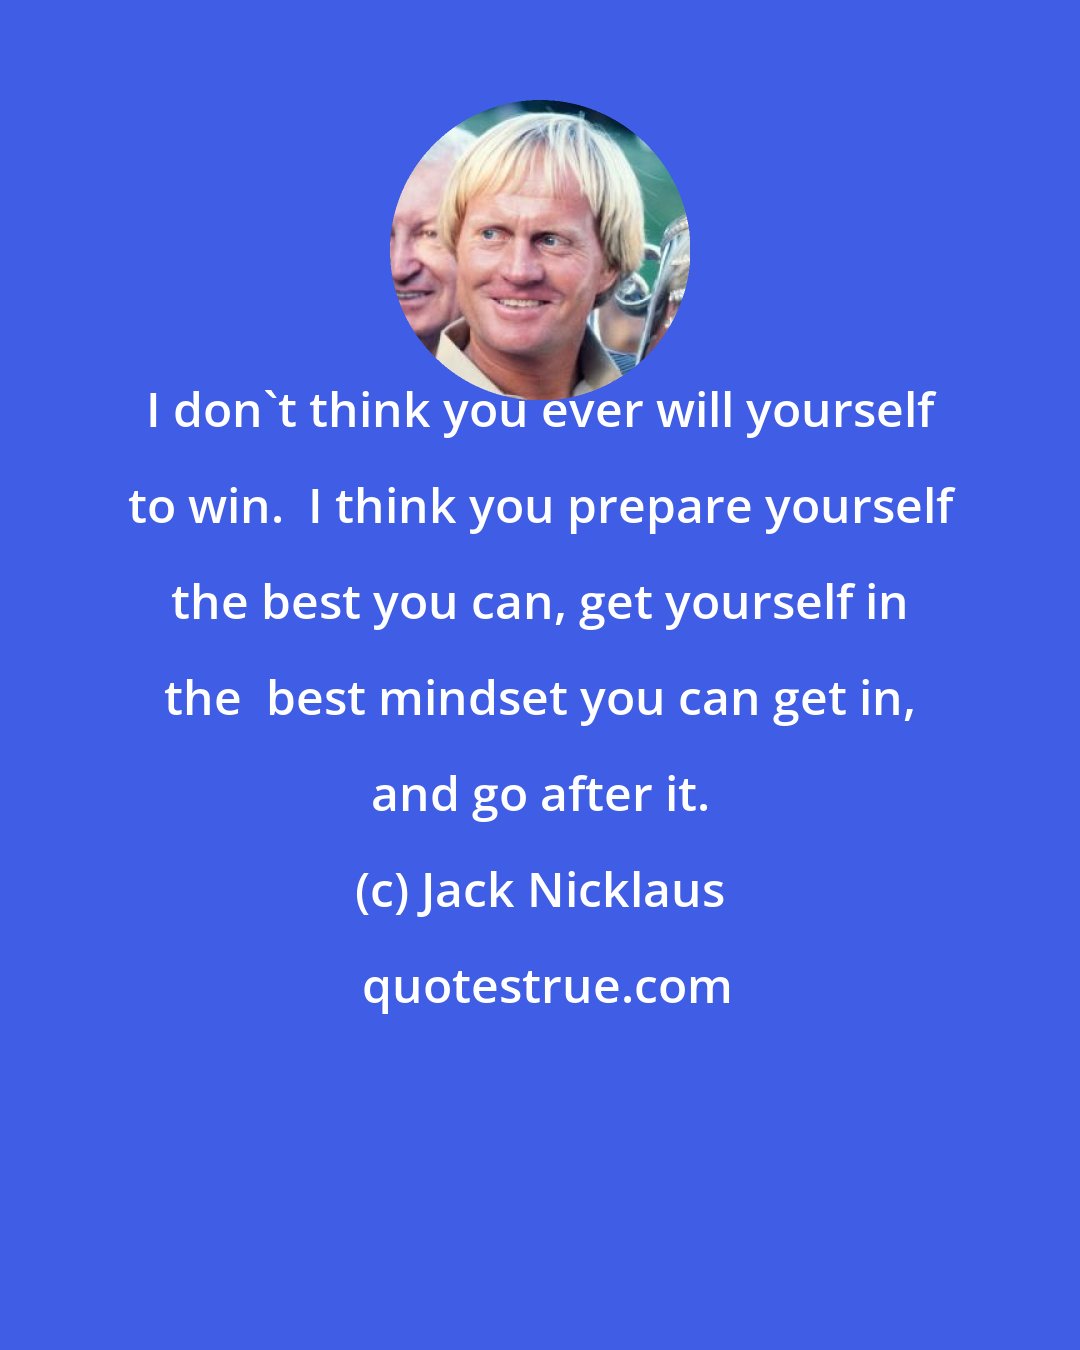 Jack Nicklaus: I don't think you ever will yourself to win.  I think you prepare yourself the best you can, get yourself in the  best mindset you can get in, and go after it.